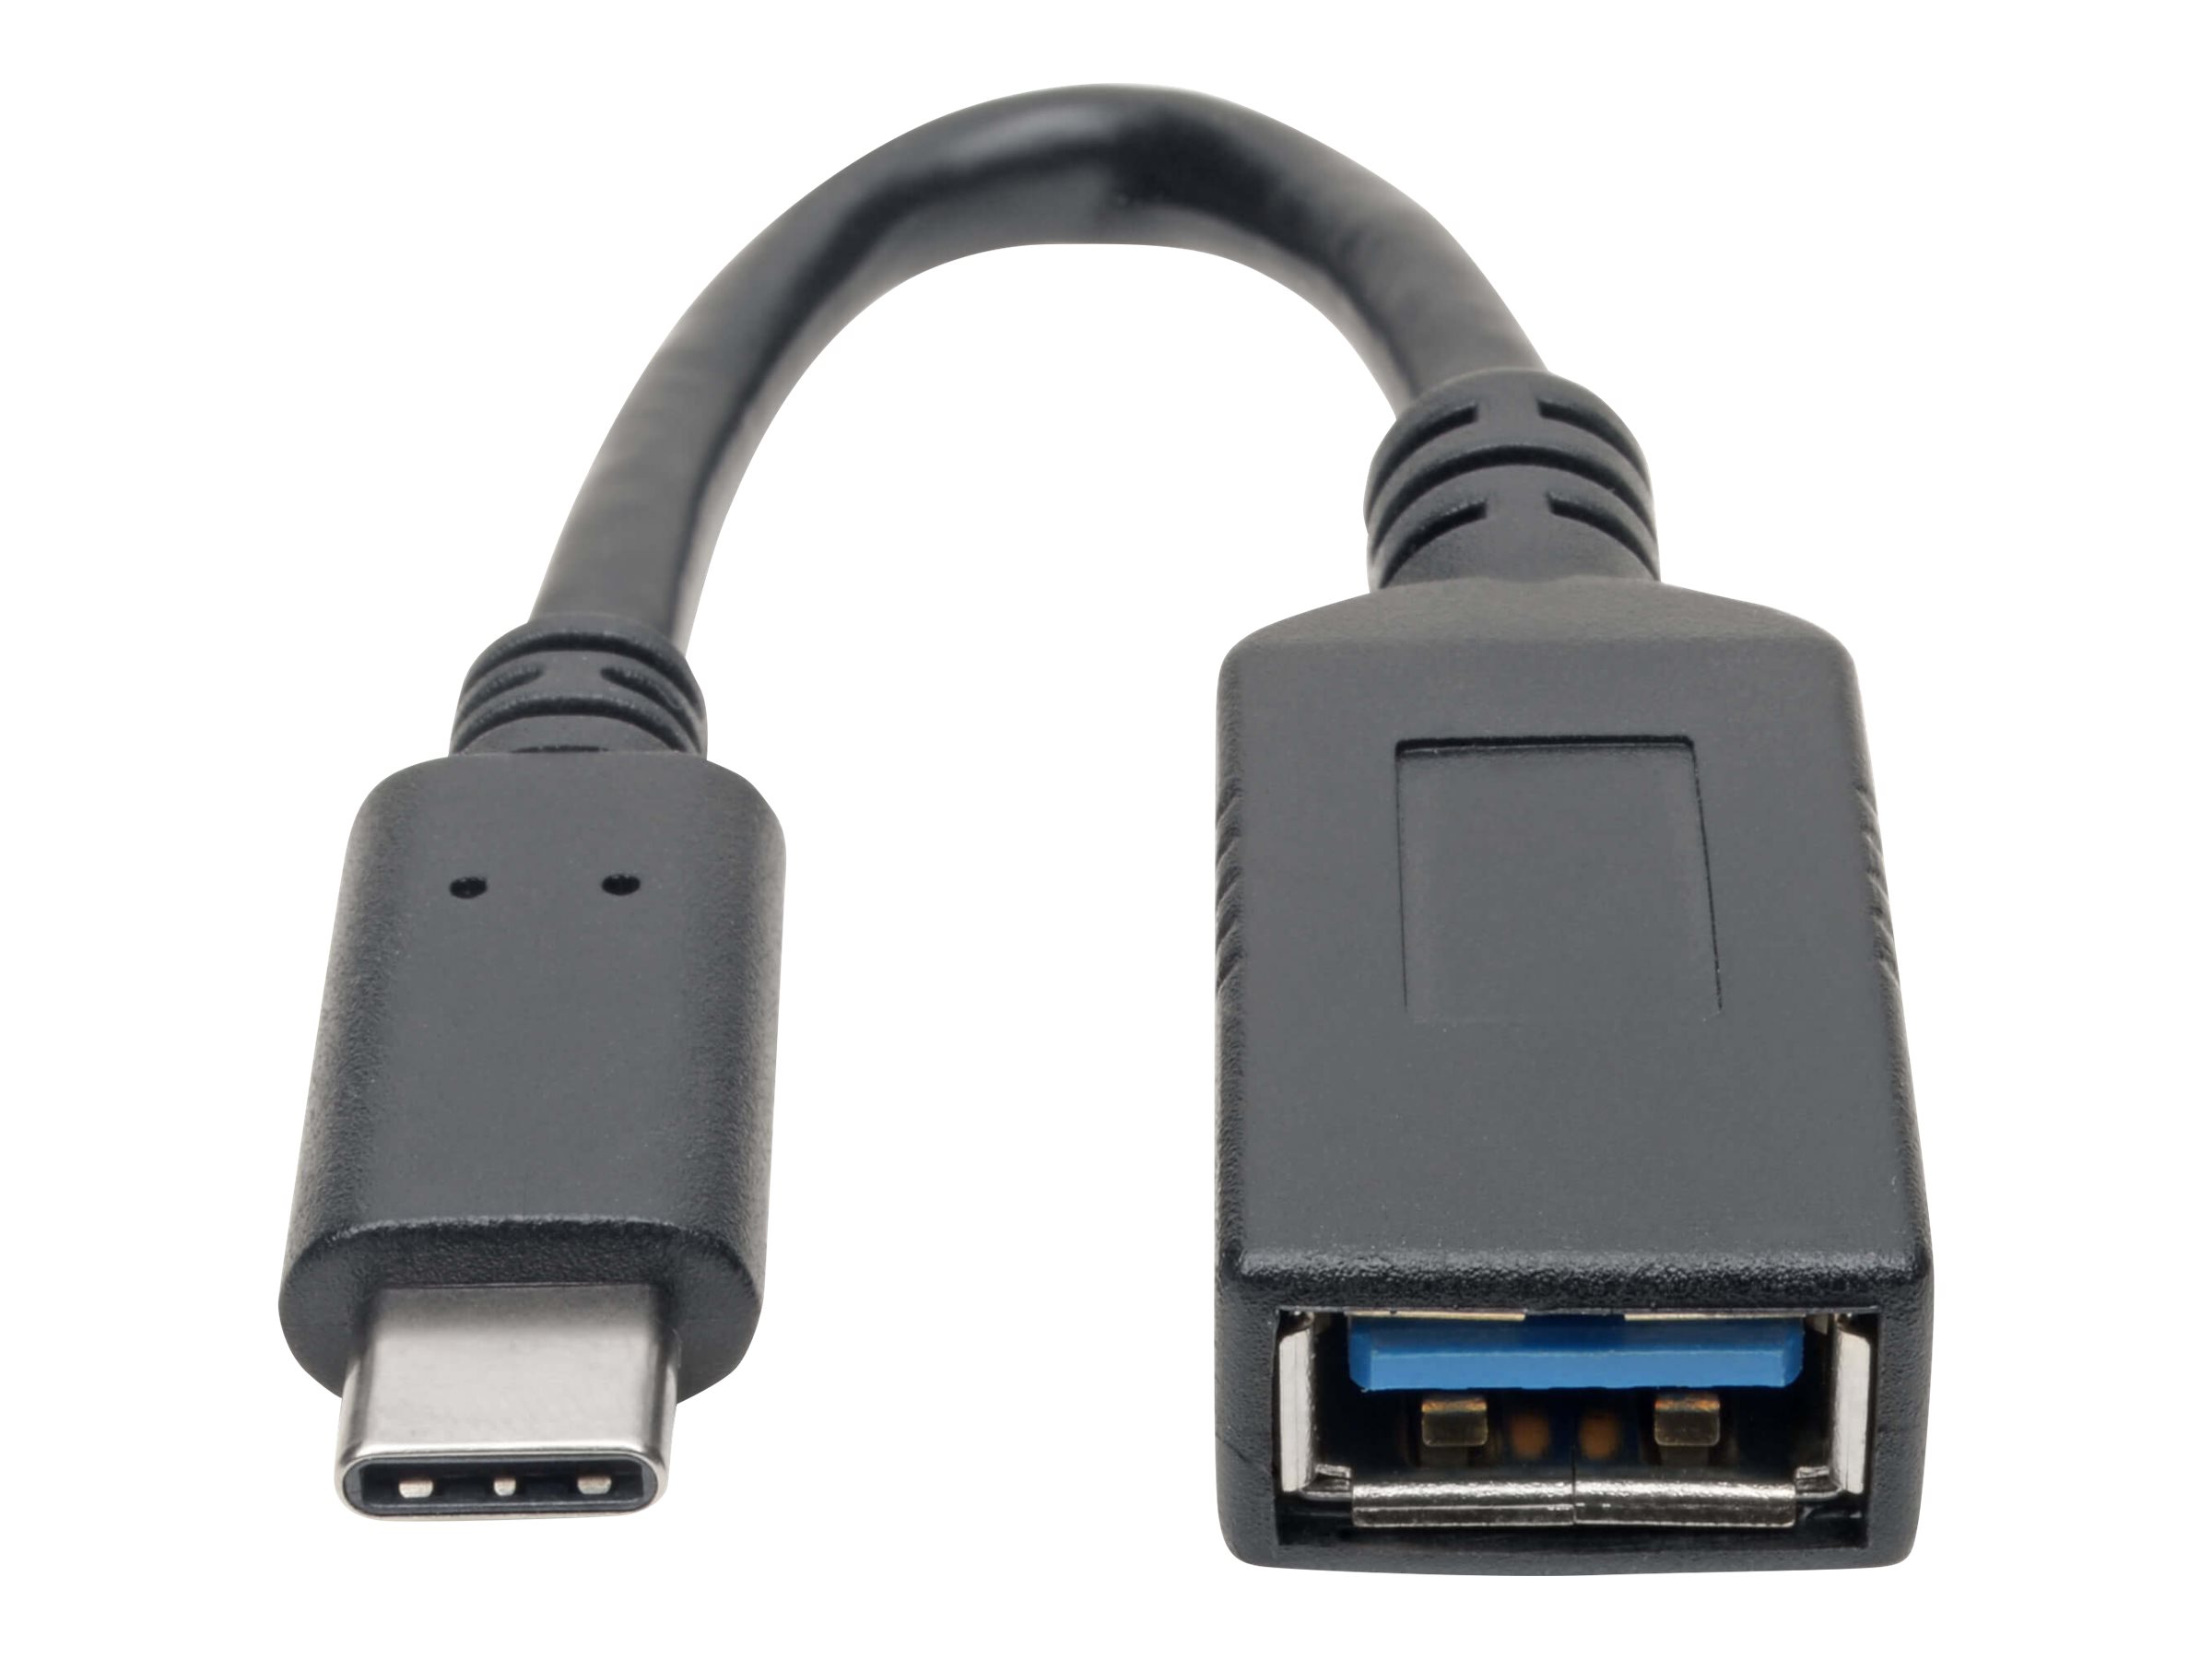 Tripp Lite USB Type-C to USB Type-A Adapter Cable, M/F, 3.1, Gen 1, 5 Gbps, USB-IF, 6 in. - Thunderbolt 3 - Adaptateur USB - 24 pin USB-C (M) pour USB type A (F) - Thunderbolt 3 / USB / USB 2.0 / USB 3.0 / USB 3.1 Gen 1 - 15.2 cm - noir - U428-C6N-F - Câbles USB